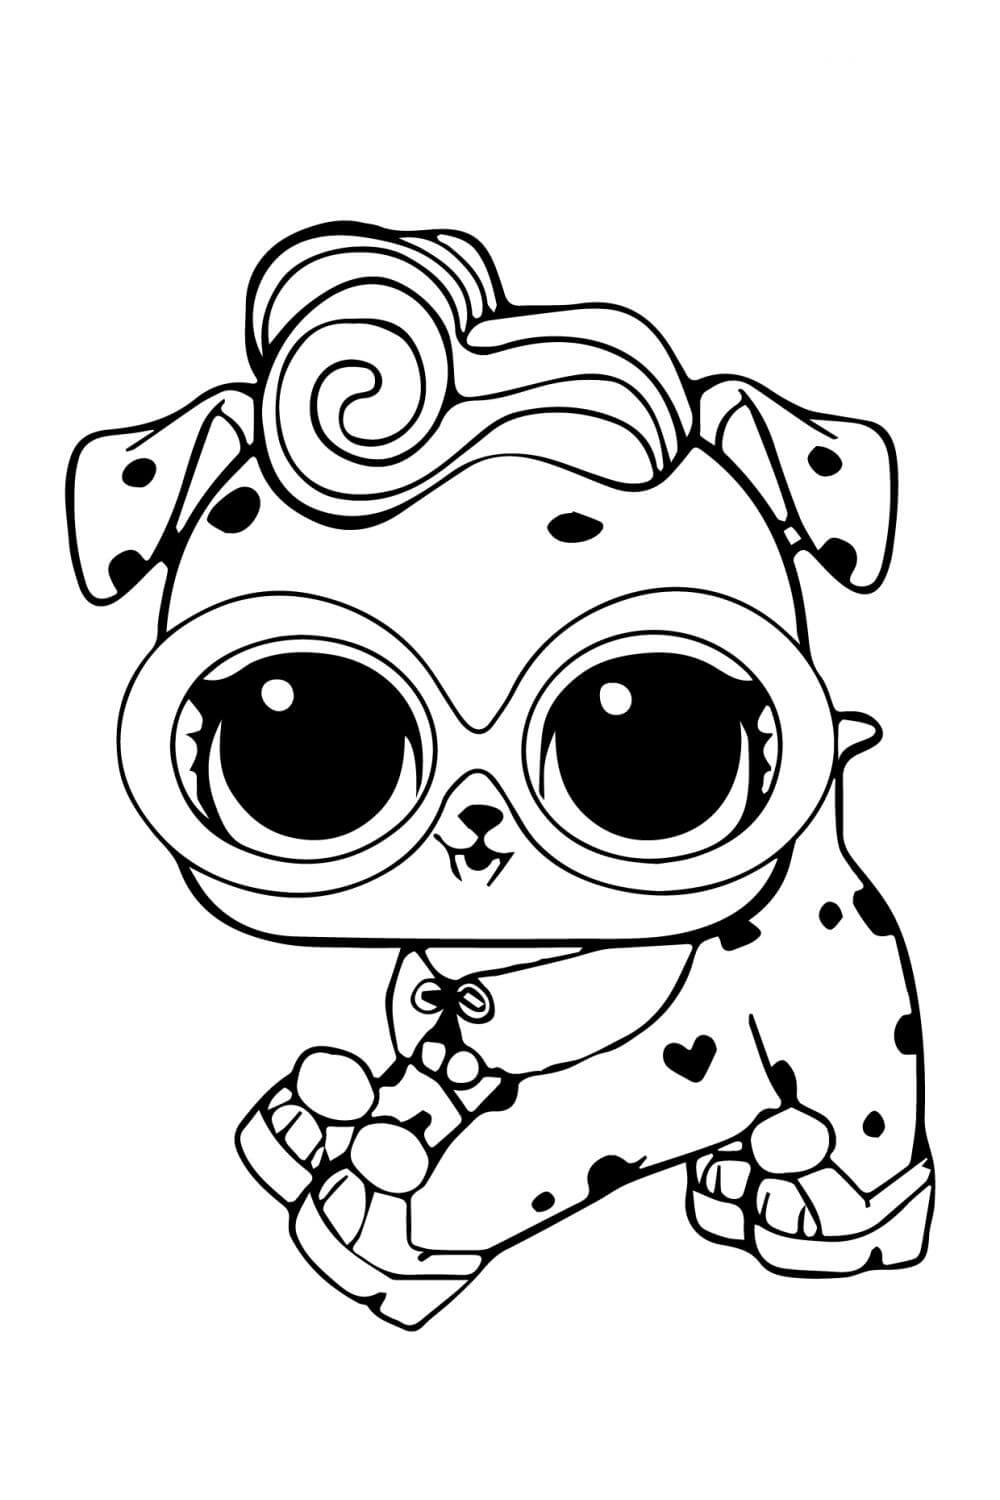 LOL Pets Dolmatinets Coloring Page - Free Printable Coloring Pages for Kids